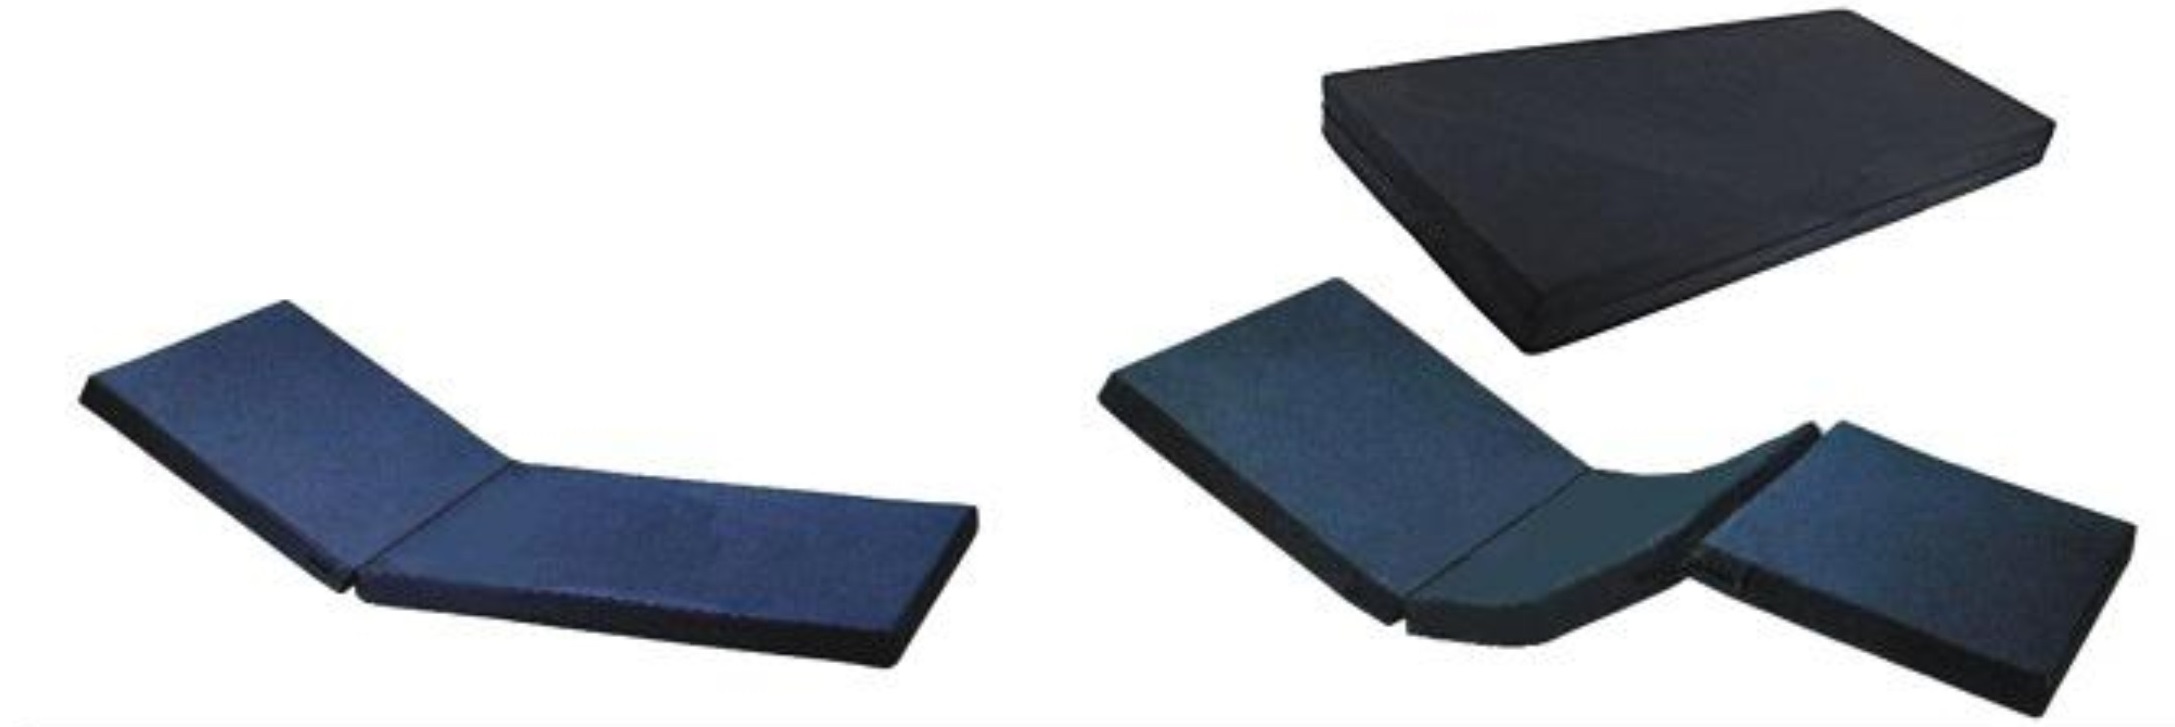 controller/assets/products_upload/Bed Mattress, Model No.: KI- SS- 131